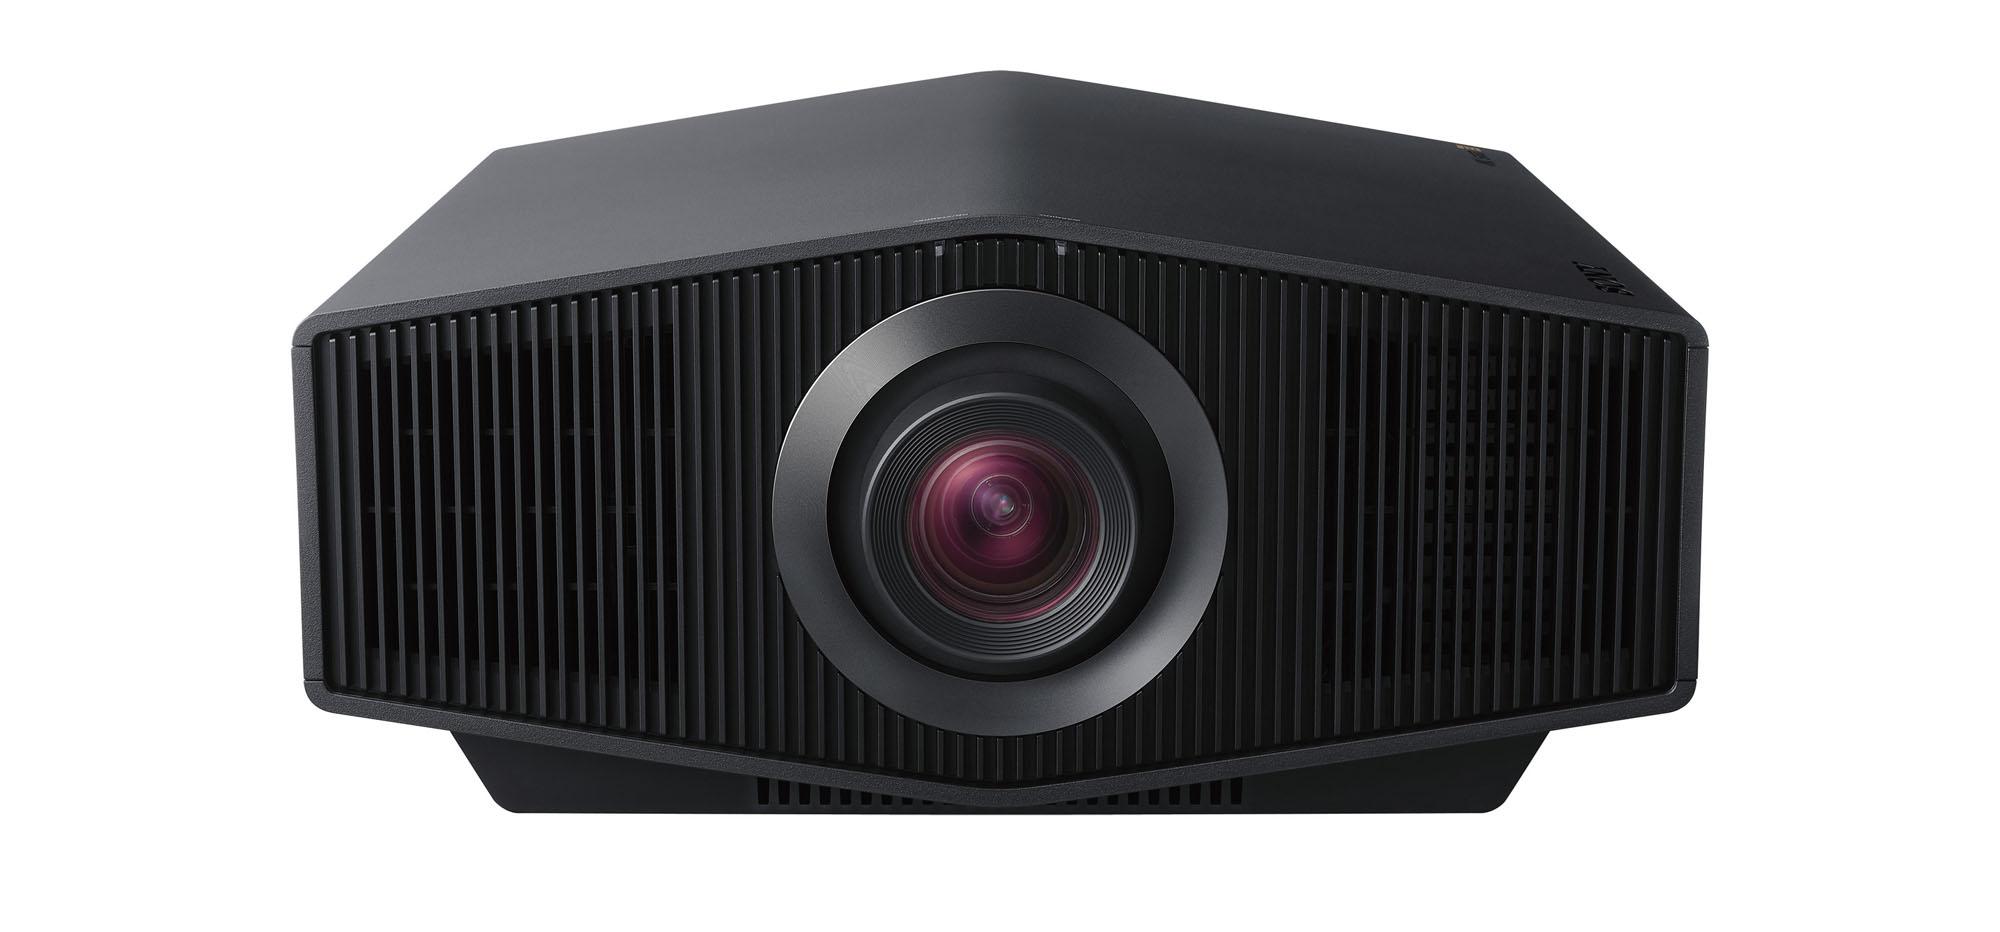 This is no mere annual refresh. Sony's three new home theater projectors are a generational leap forward. cc9c3e38 vplxw7000 front 220201 02 large